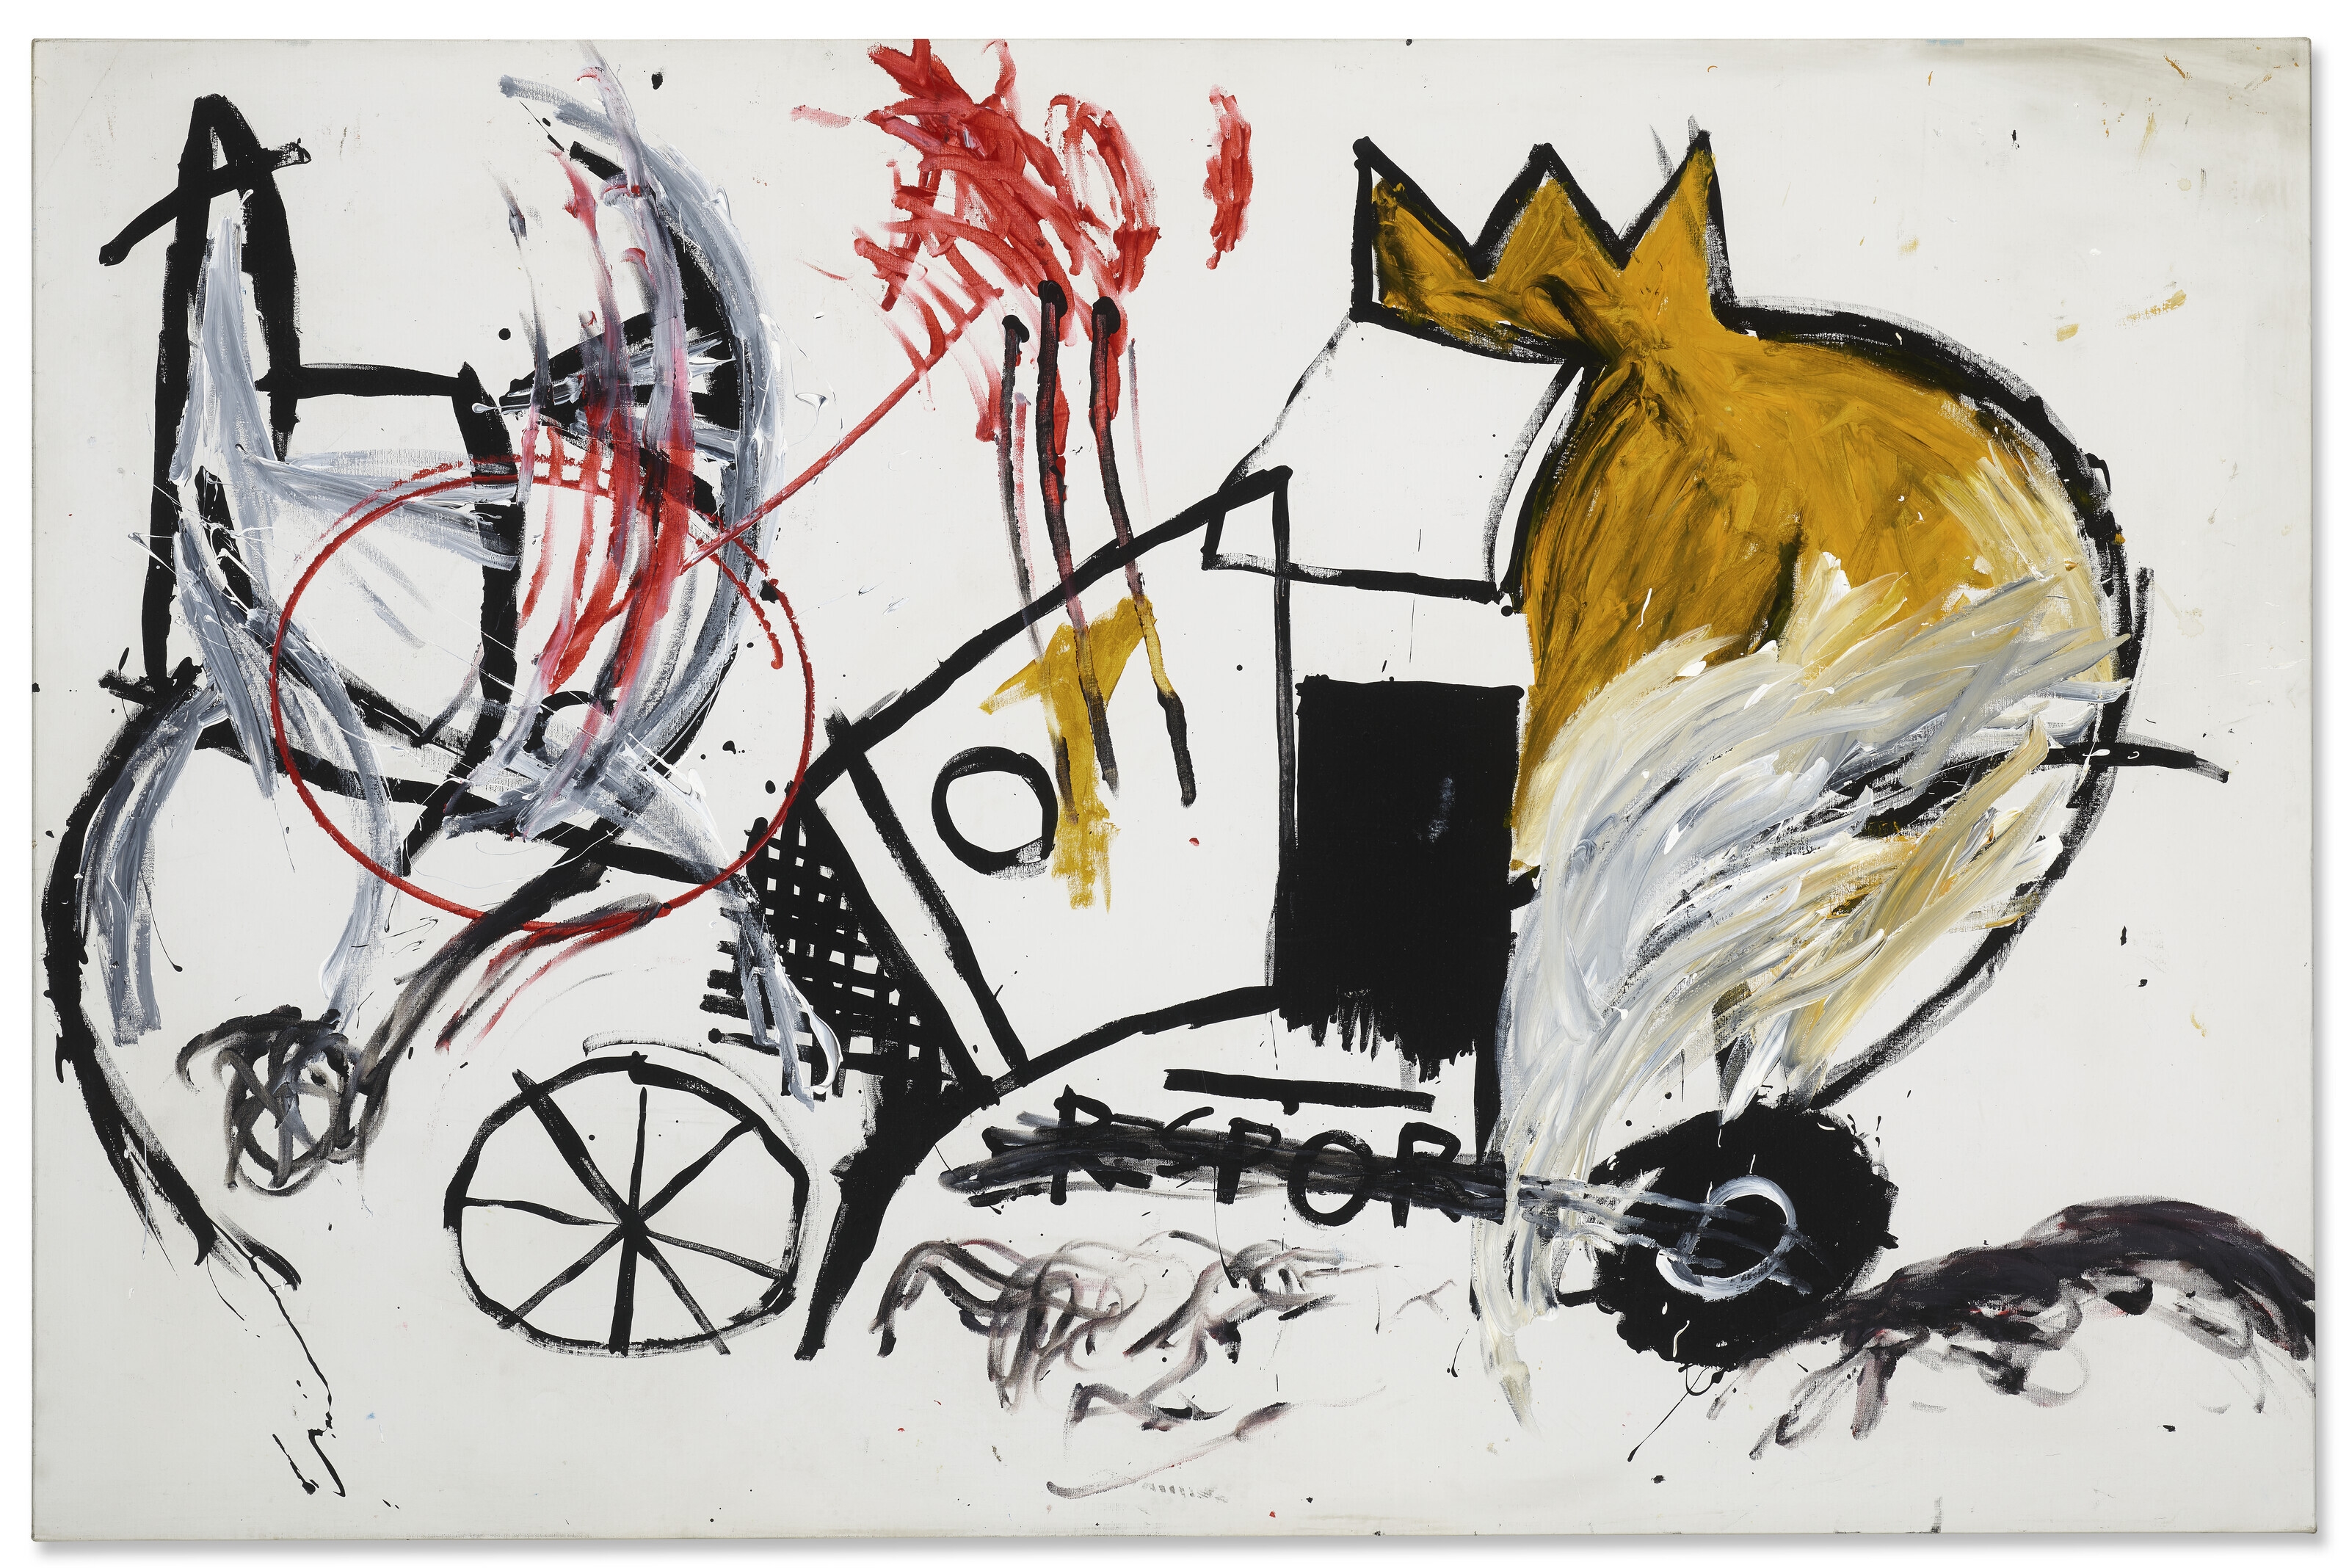 Artwork by Jean-Michel Basquiat, Untitled, Made of acrylic on canvas